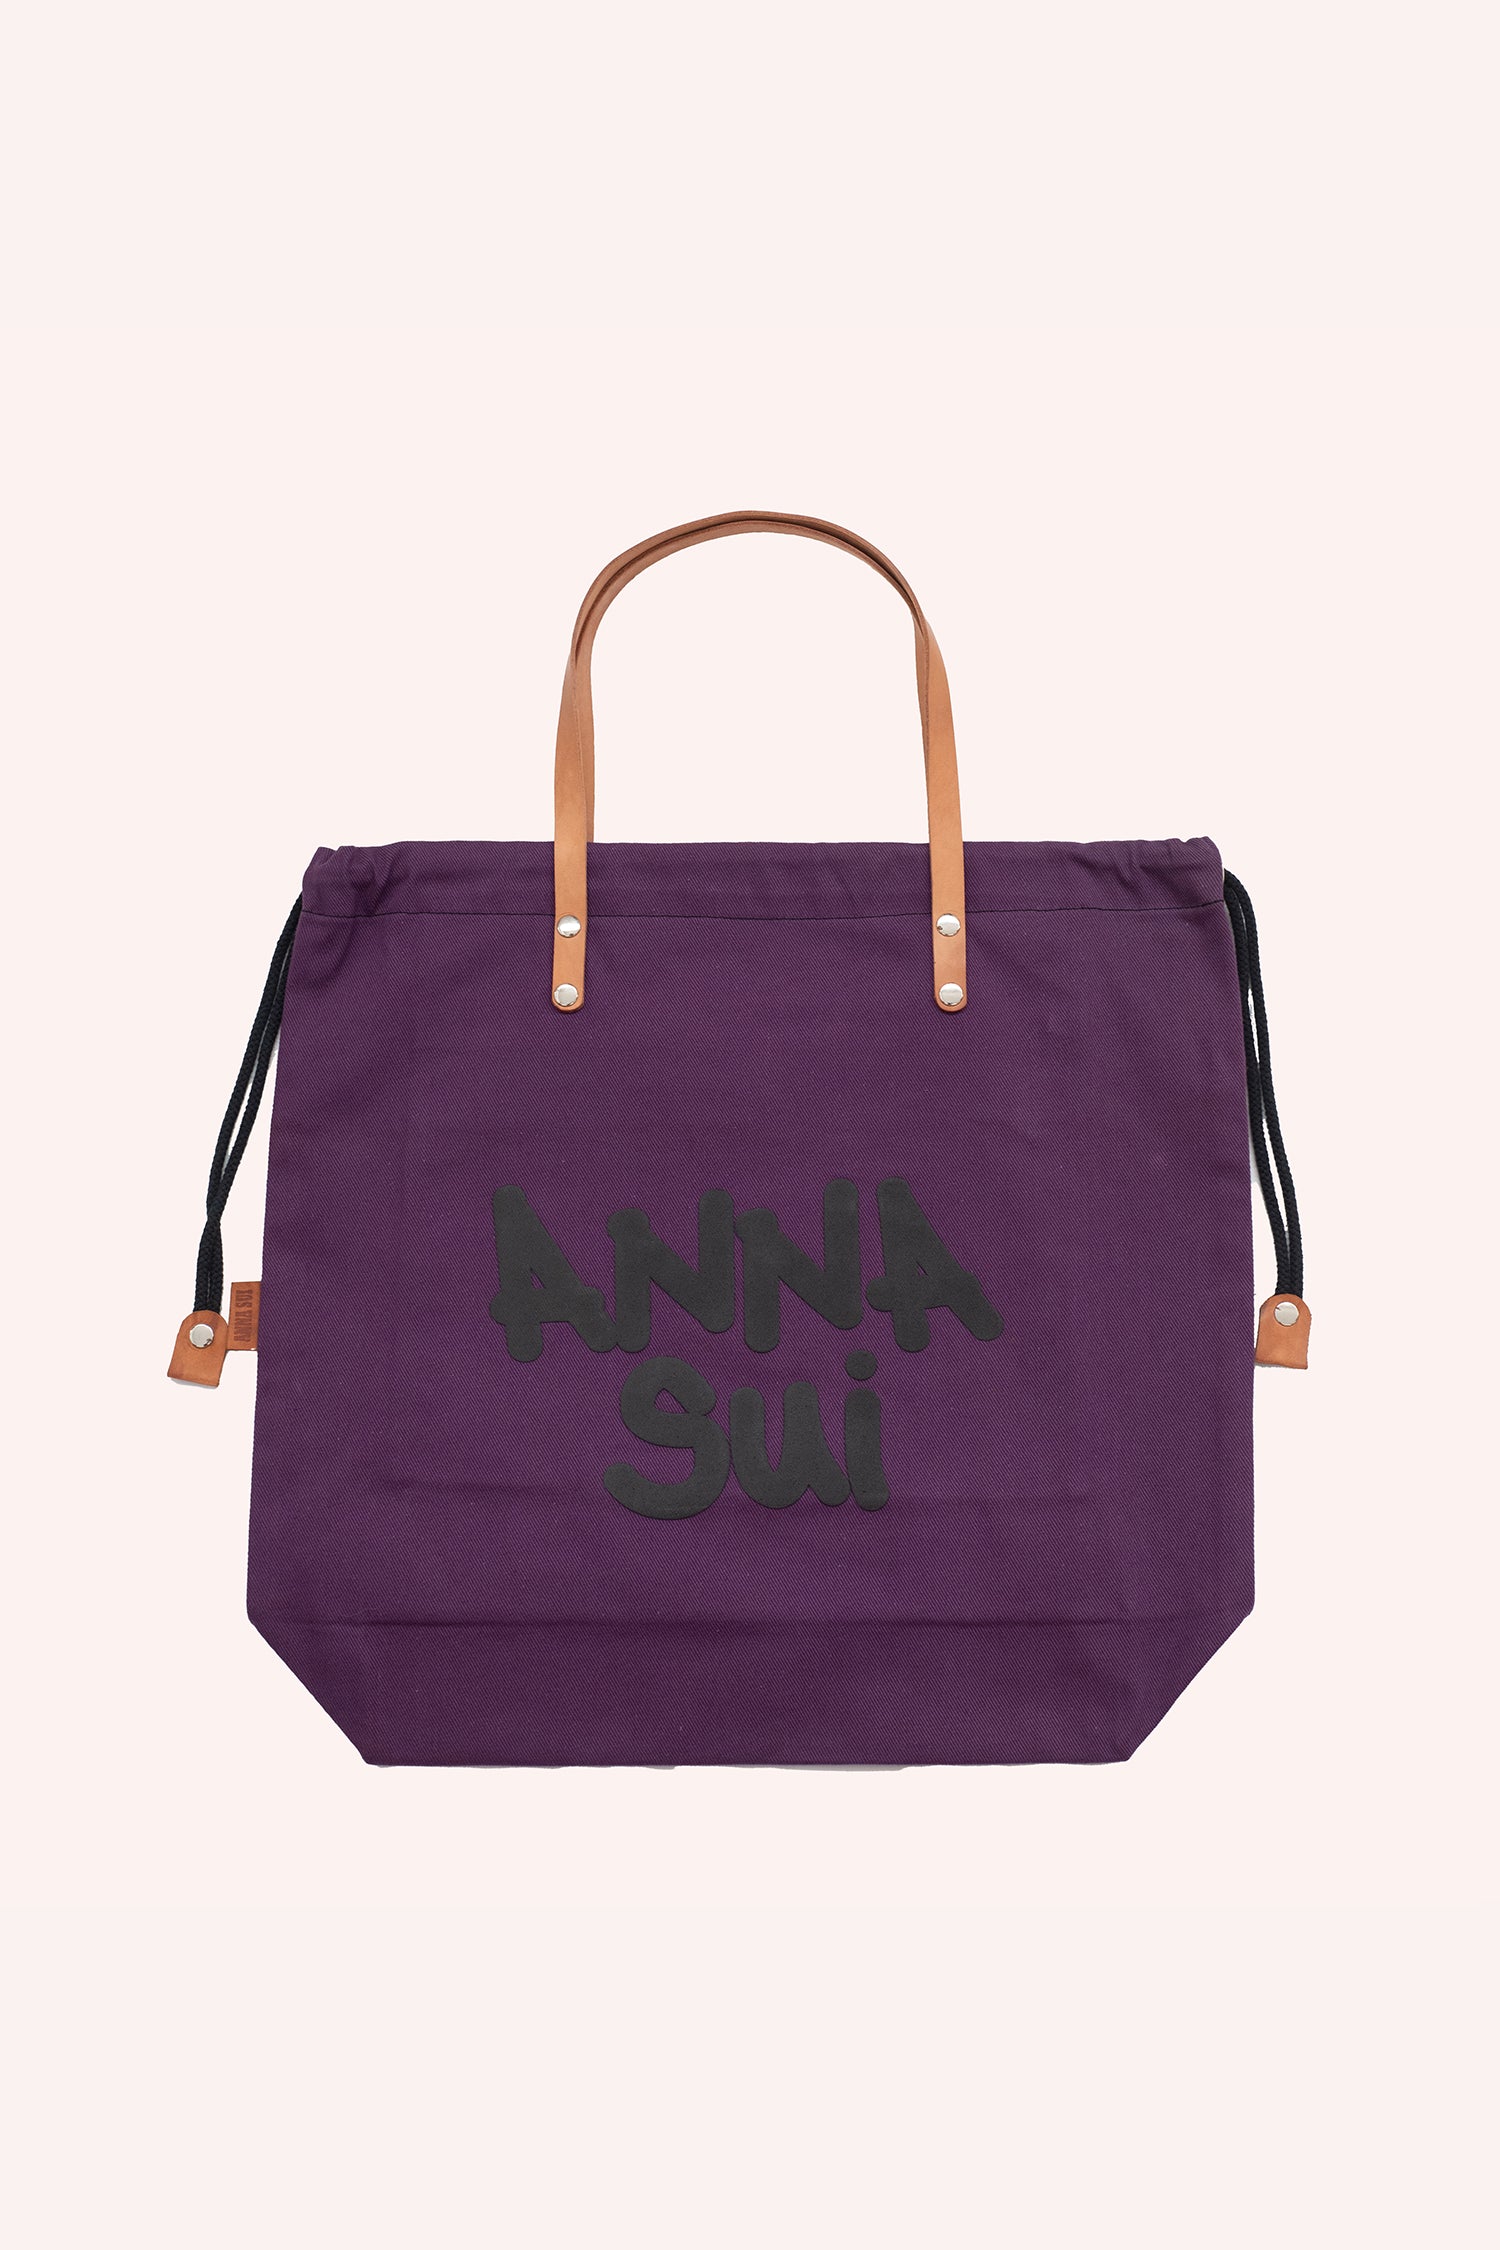 Tote bag, purple squared shape, brown handles, black laces to closed, Anna Sui branding in large font